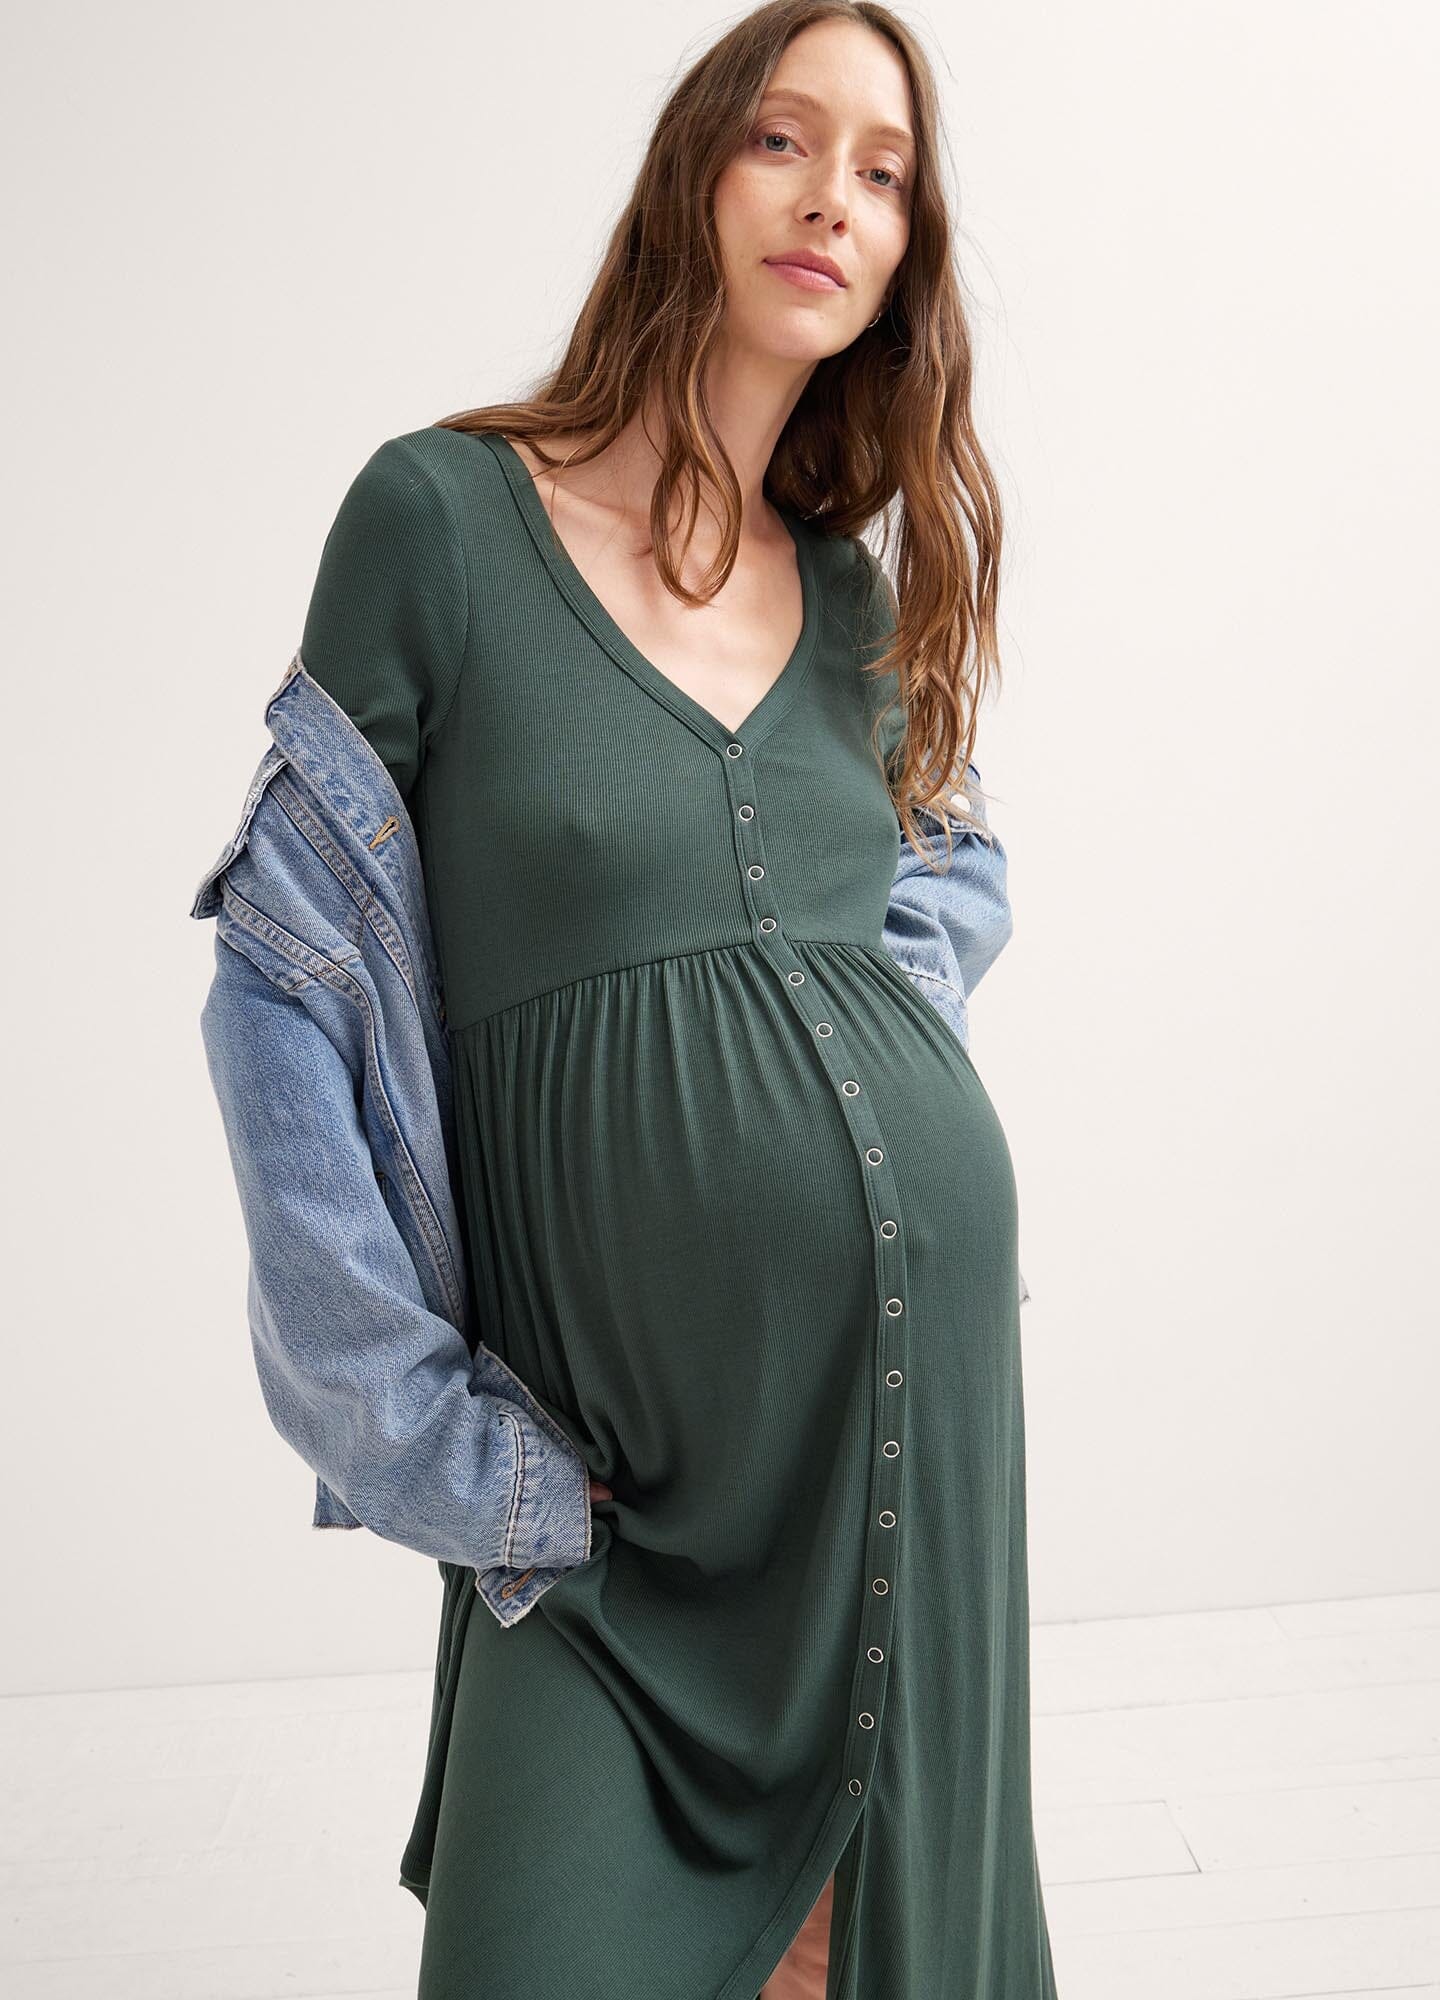 10 Fall Maternity Outfits To Inspire Your Style - The Mama Notes